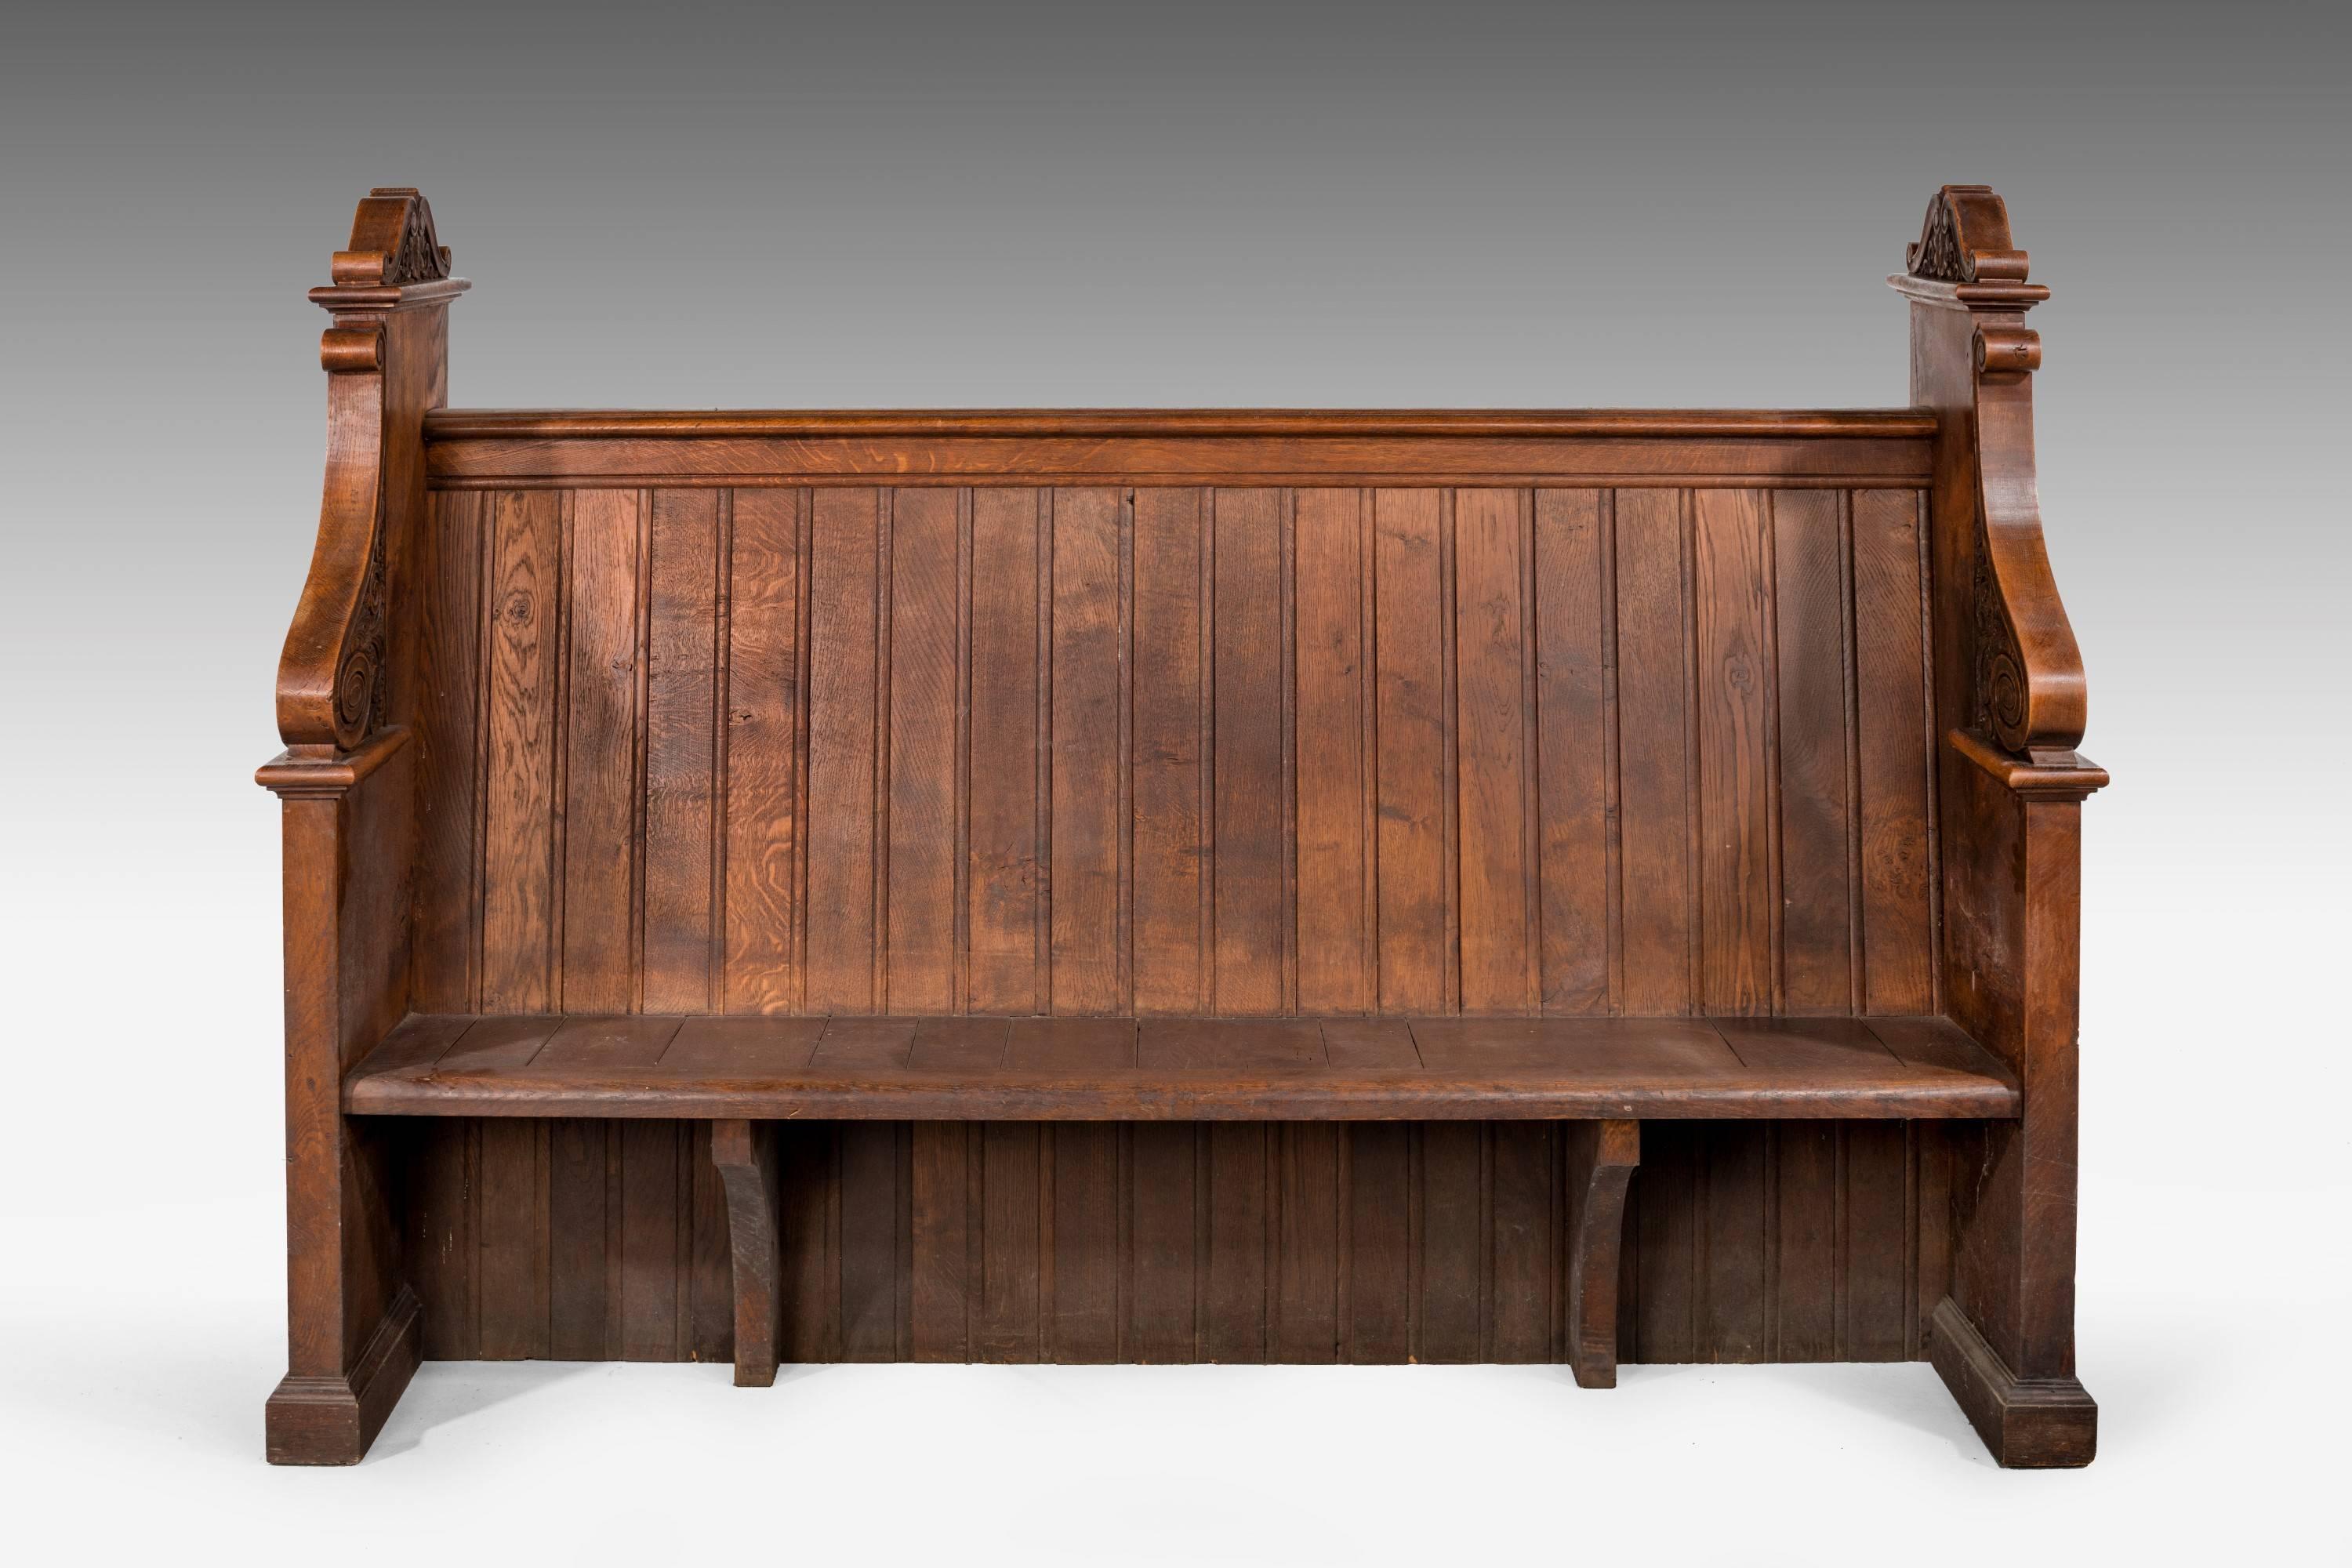 A pair of very well carved and designed Gothic oak pews. Shaped end supports. In excellent overall condition. A pair but available separately.

Seat height: 16 inches.